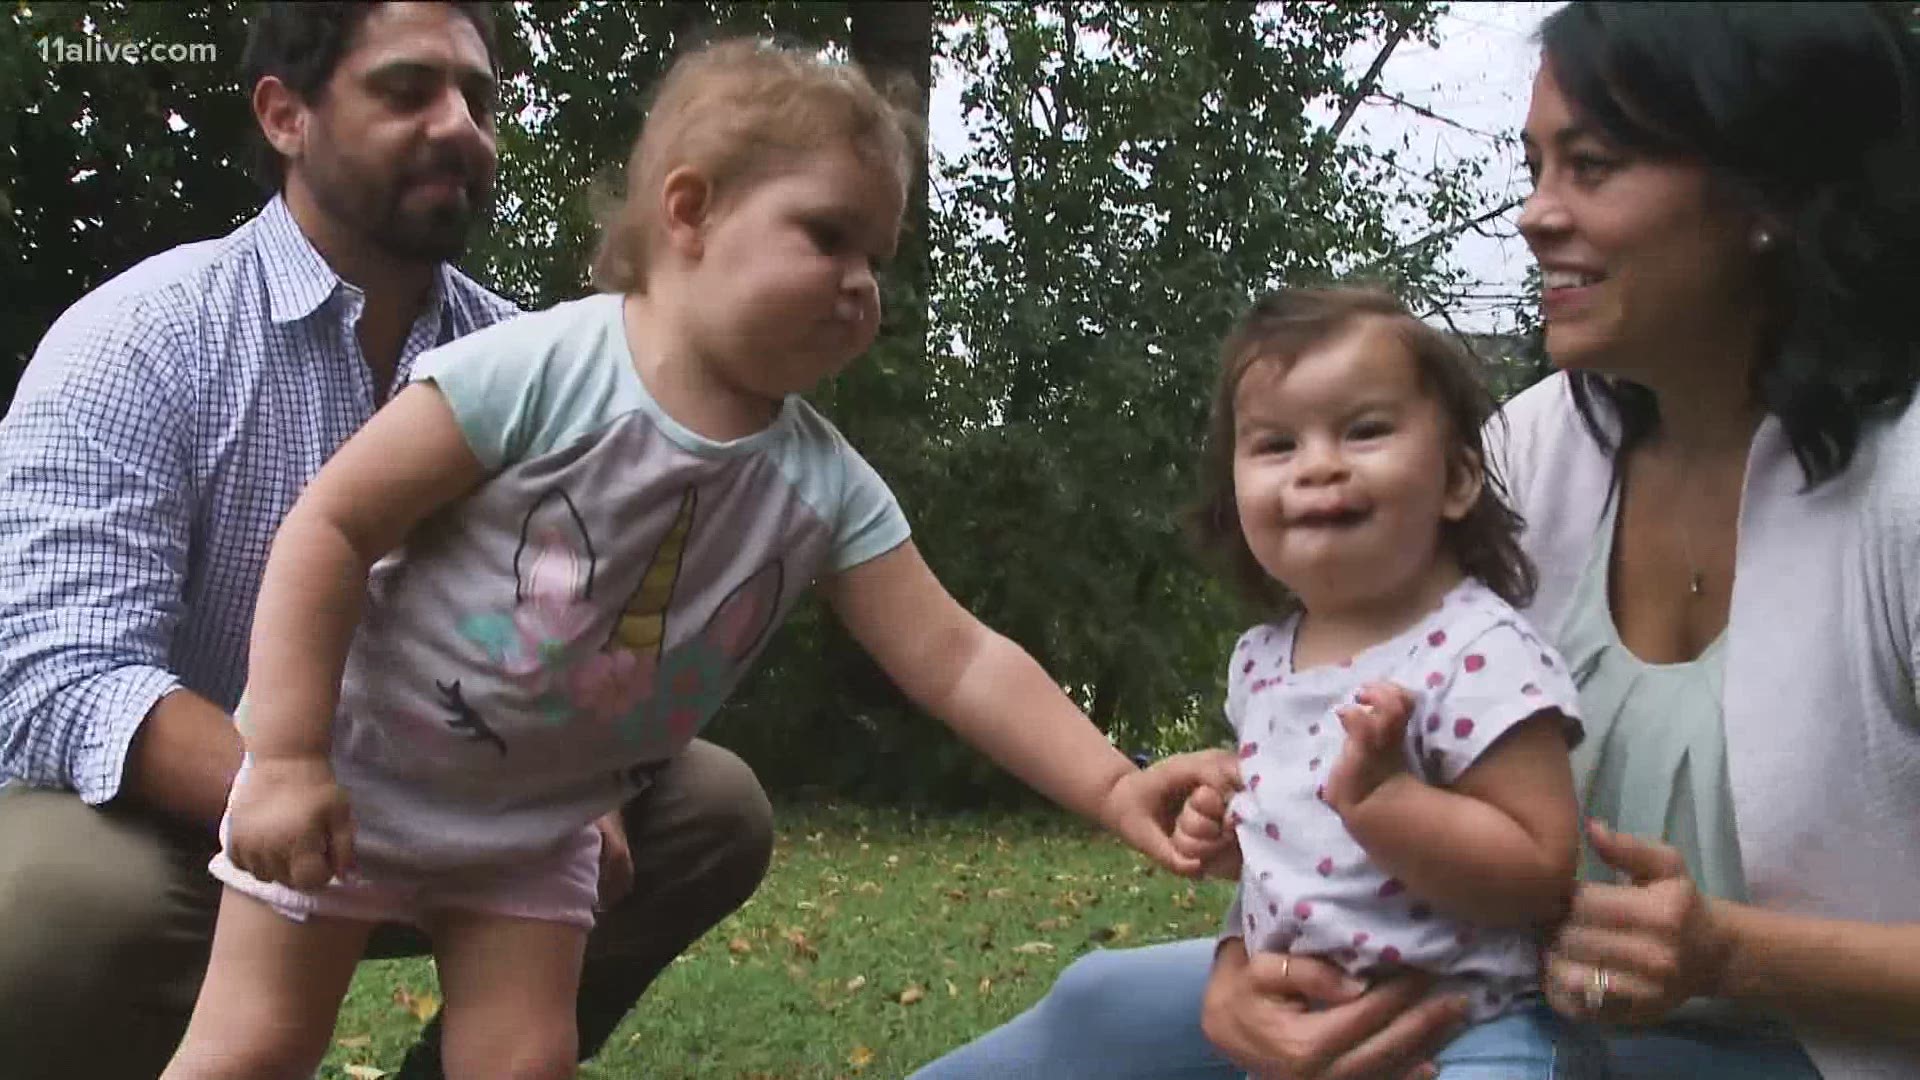 Diagnosed with cancer at two and little sister born with severe abnormalities, the family lived just miles from a Georgia plant releasing toxic gas.